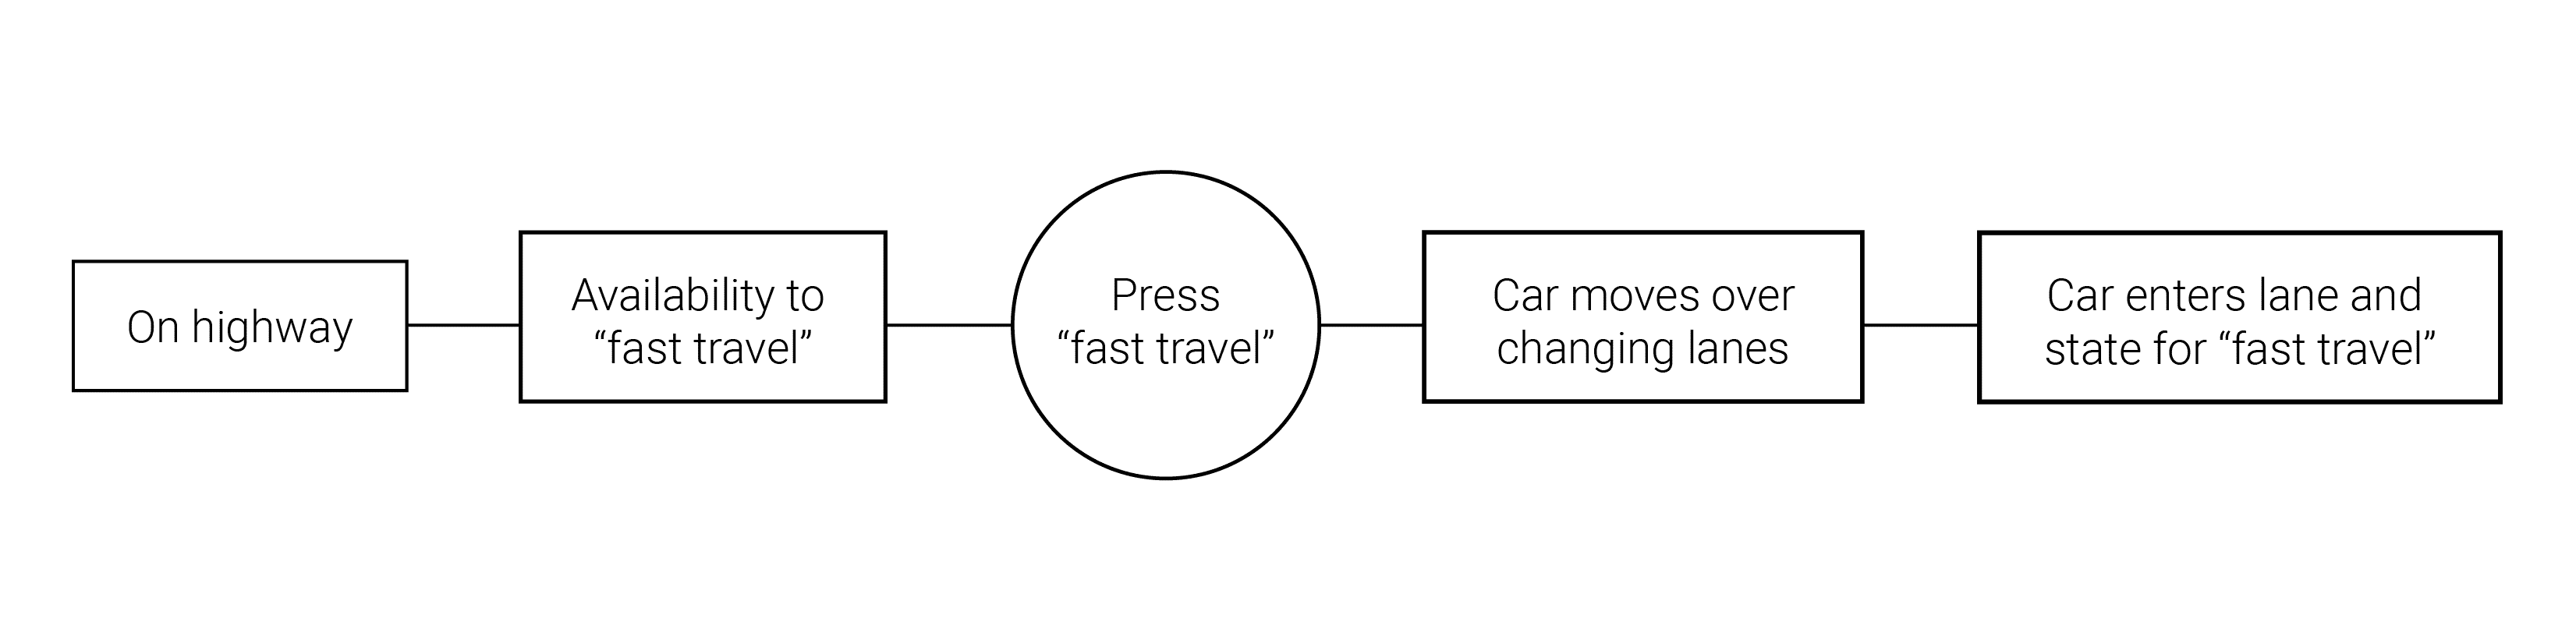 Highway fast travel use case flow